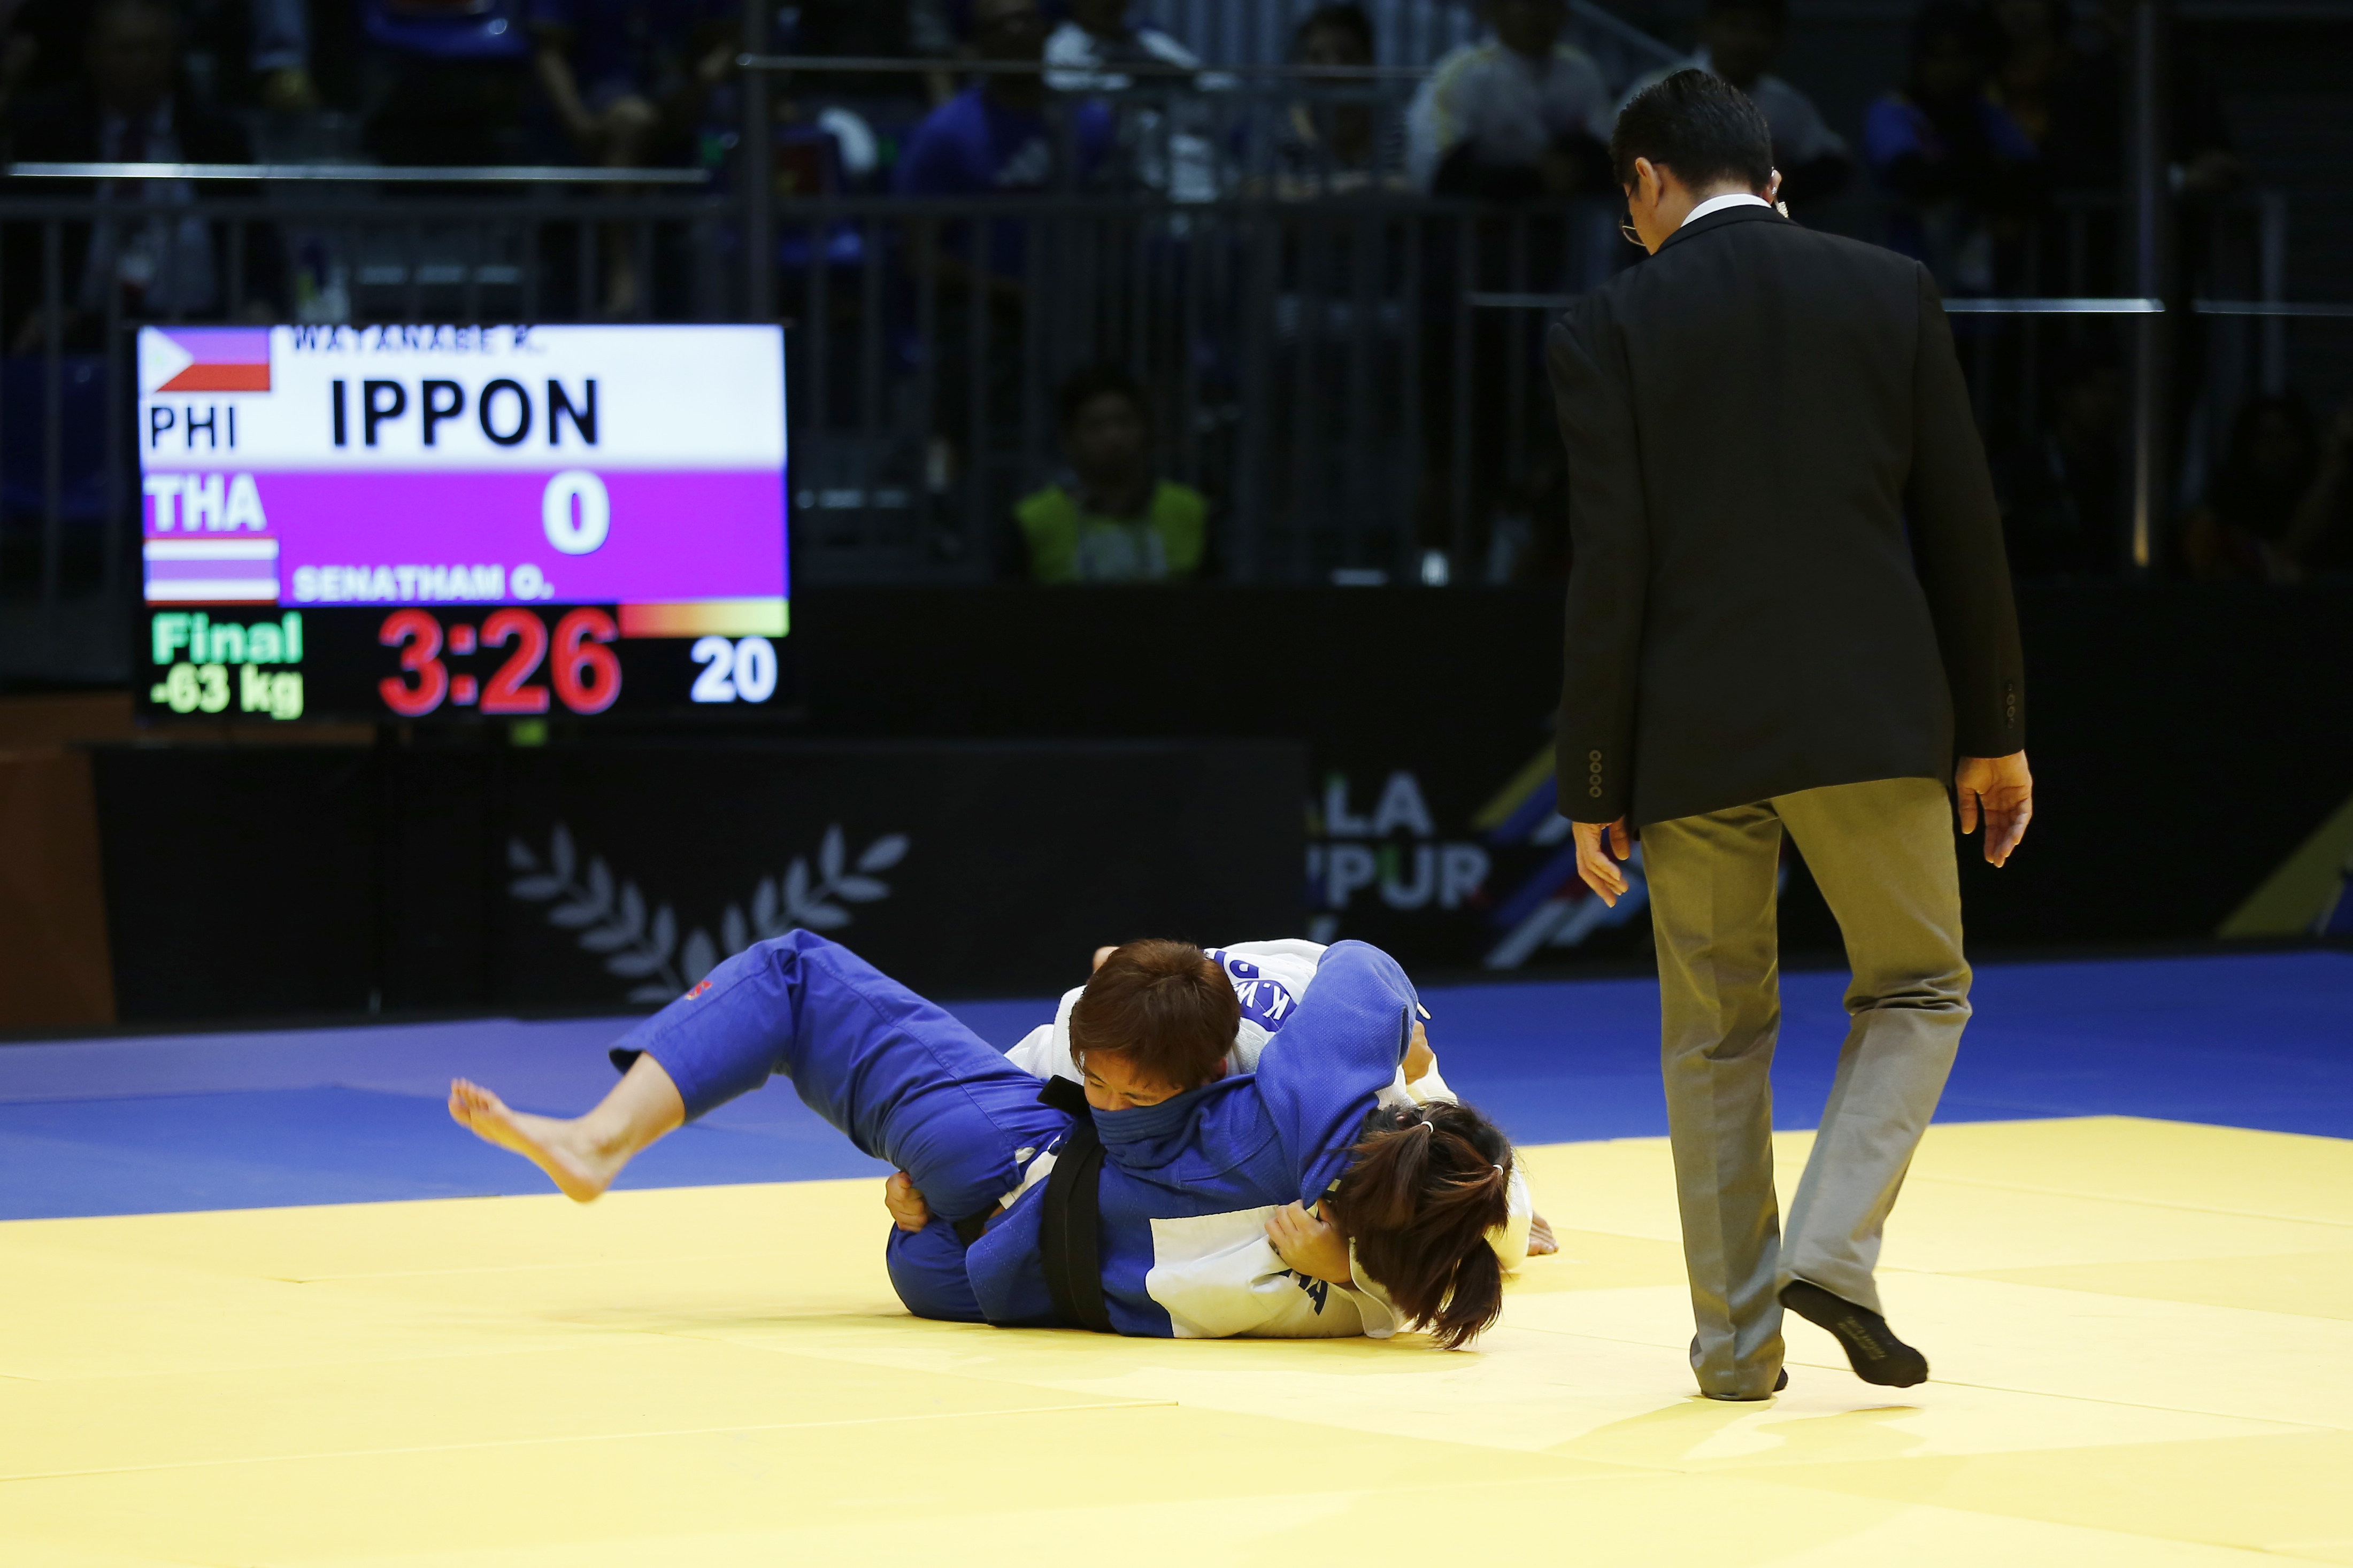 Kiyomi Watanebe of the Philippines (white) competes against Oran Senetham of Thailand (blue) in the women's 63kg class of the 29th Southeast Asian Games judo competition